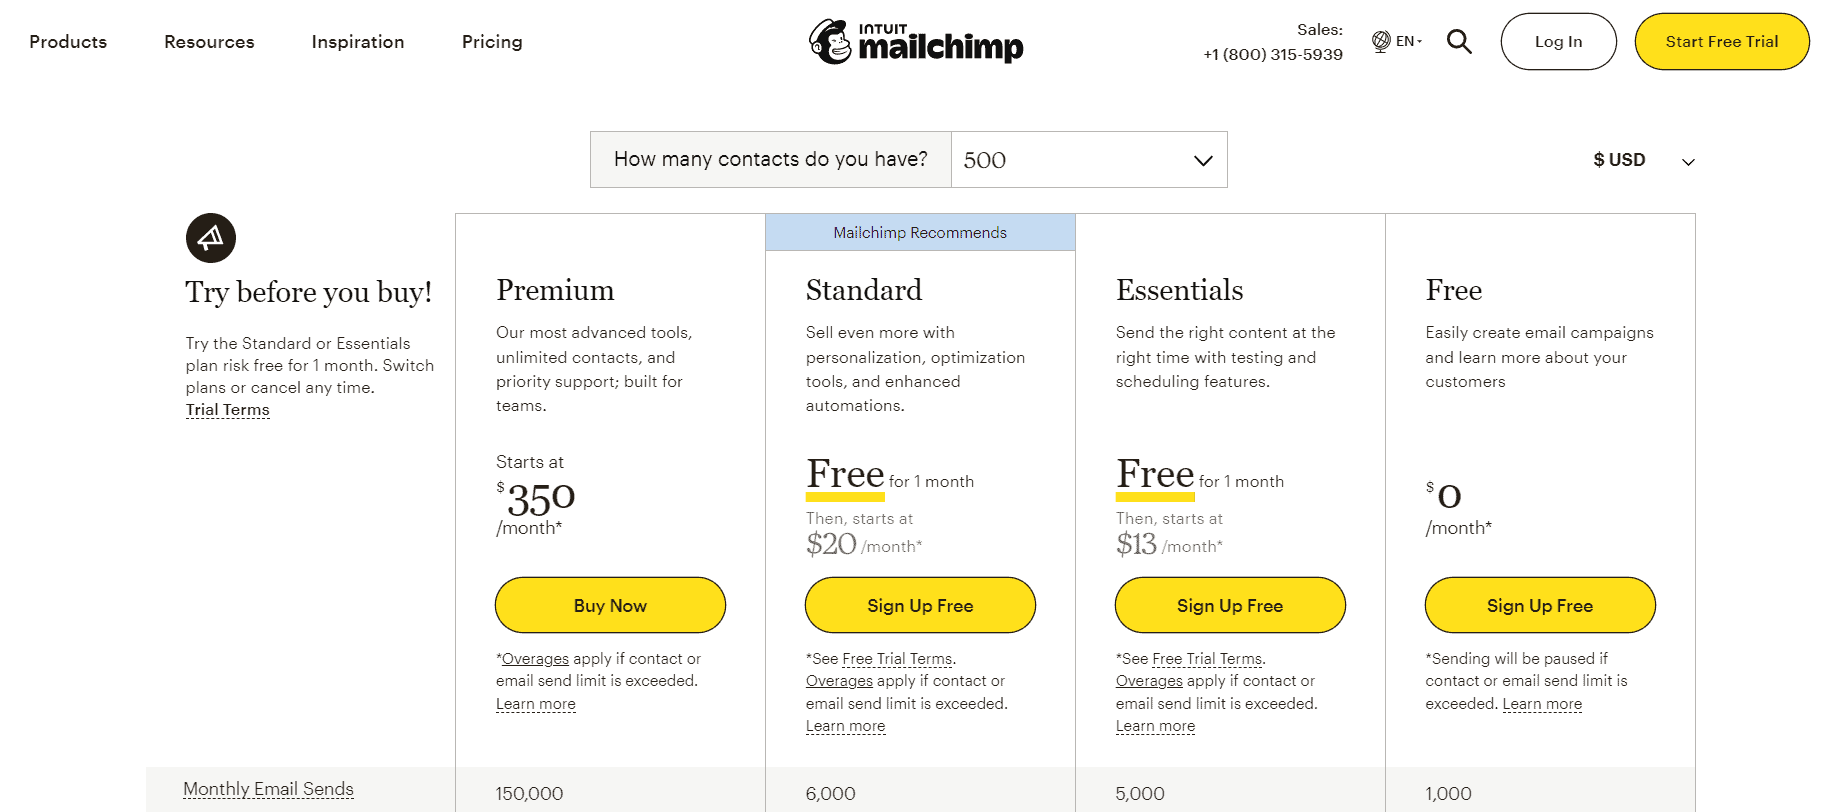 Mailchimp pricng